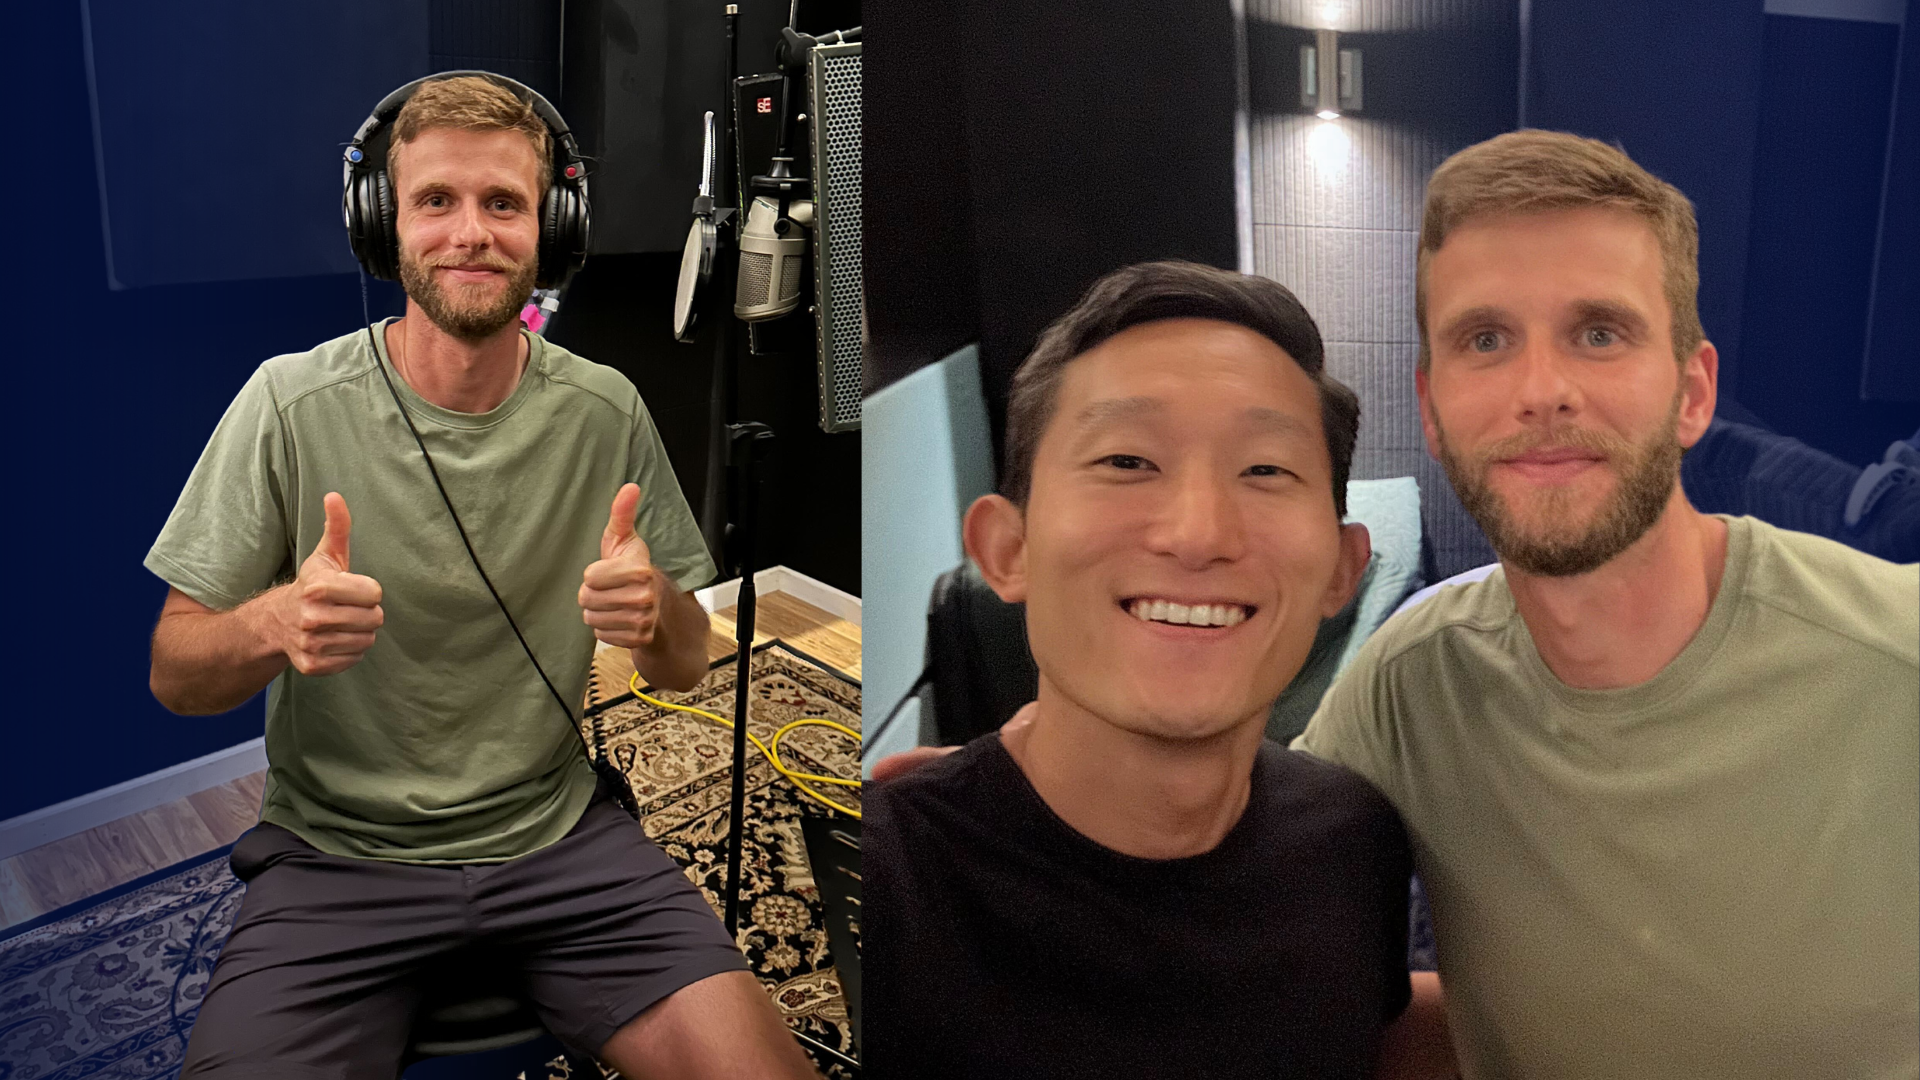 A digital collage of Collin Martin, professional soccer player, and Scott Yim, Head of Product Experience and Content at BetterSleep,at the recording studio. On the left, Collin is smiling while giving the camera a thumbs up. He is wearing large recording headphones and sitting in front of a microphone. On the right, a selfie shows Scott and Collin smiling right at the camera.